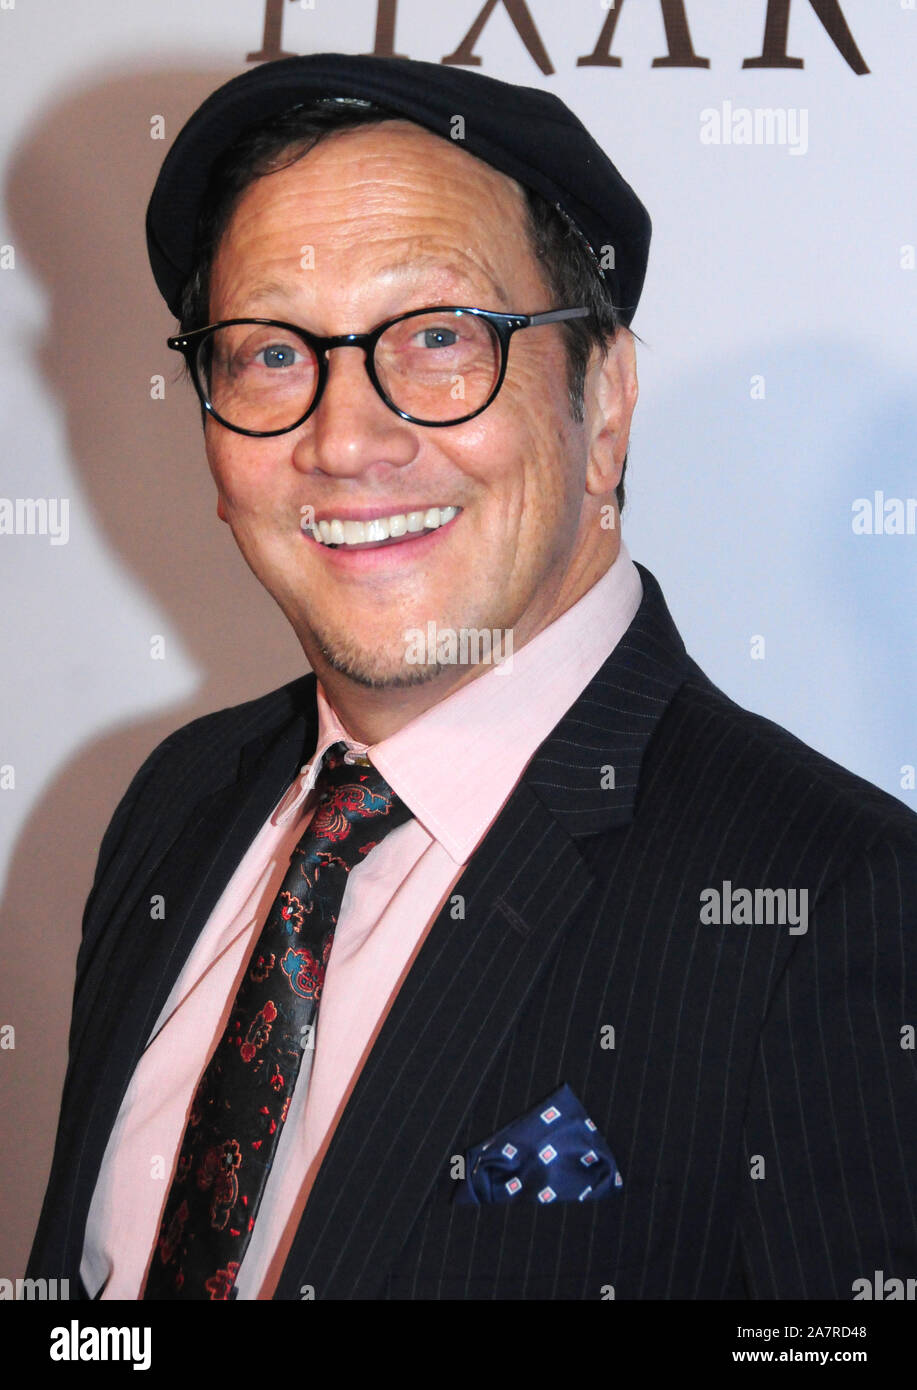 Hollywood, California, USA 3rd November 2019 Actor Rob Schneider attends Ed  Asner's 90th Birthday Party and Roast on November 3, 2019 at Hollywood  Roosevelt Hotel in Hollywood, California, USA. Photo by Barry